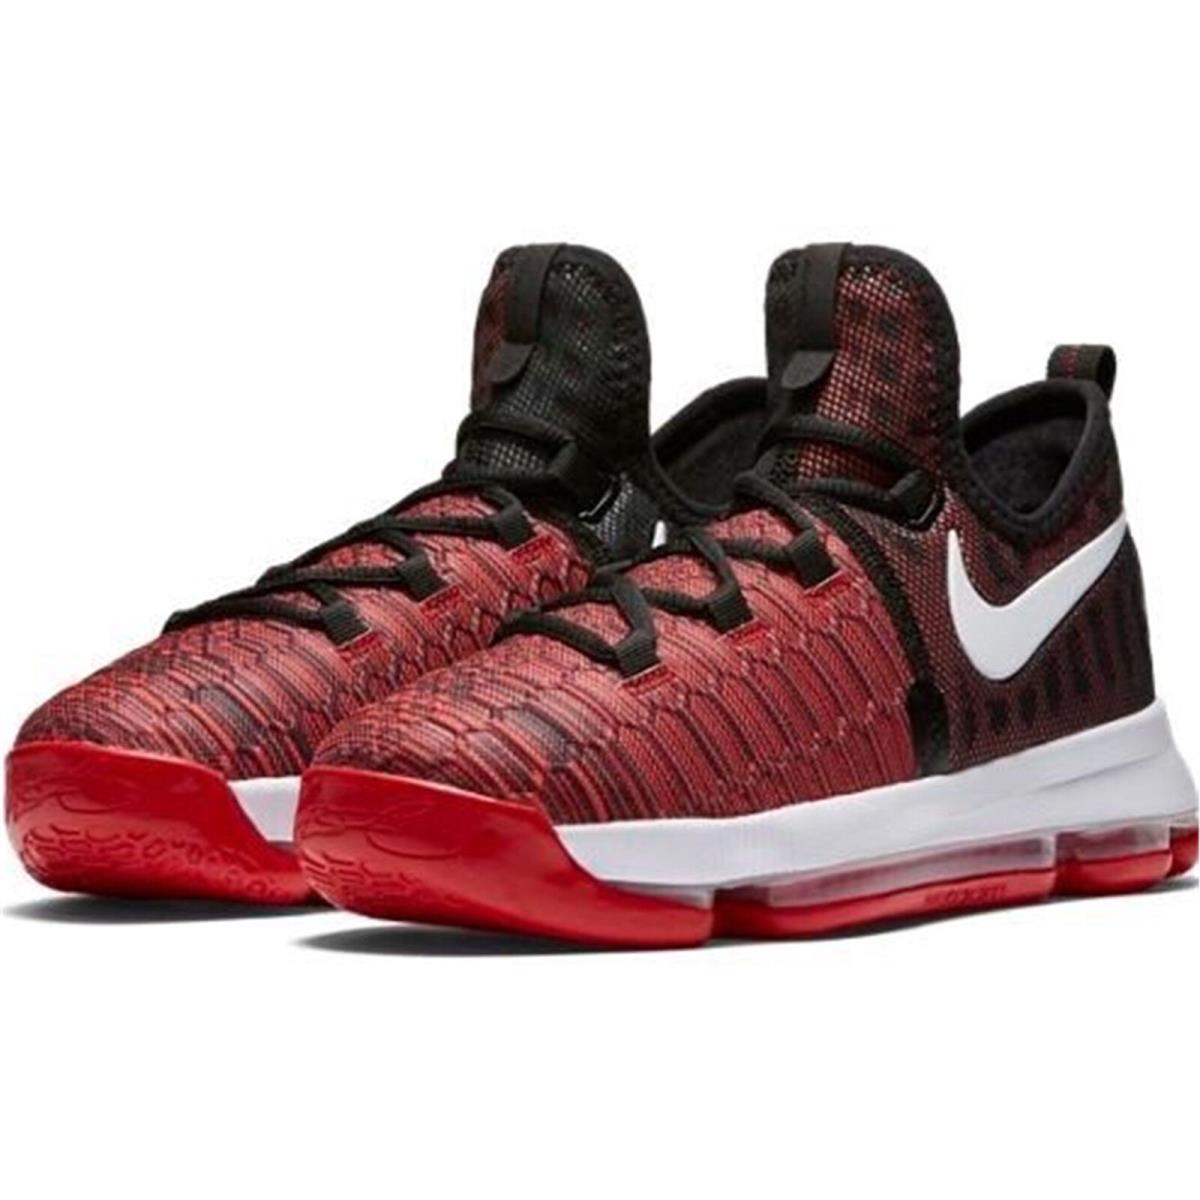 Nike Zoom KD9 GS 855908 - 610 Youth Basketball Shoes.new - UNIVERSITY RED/WHITE BLACK